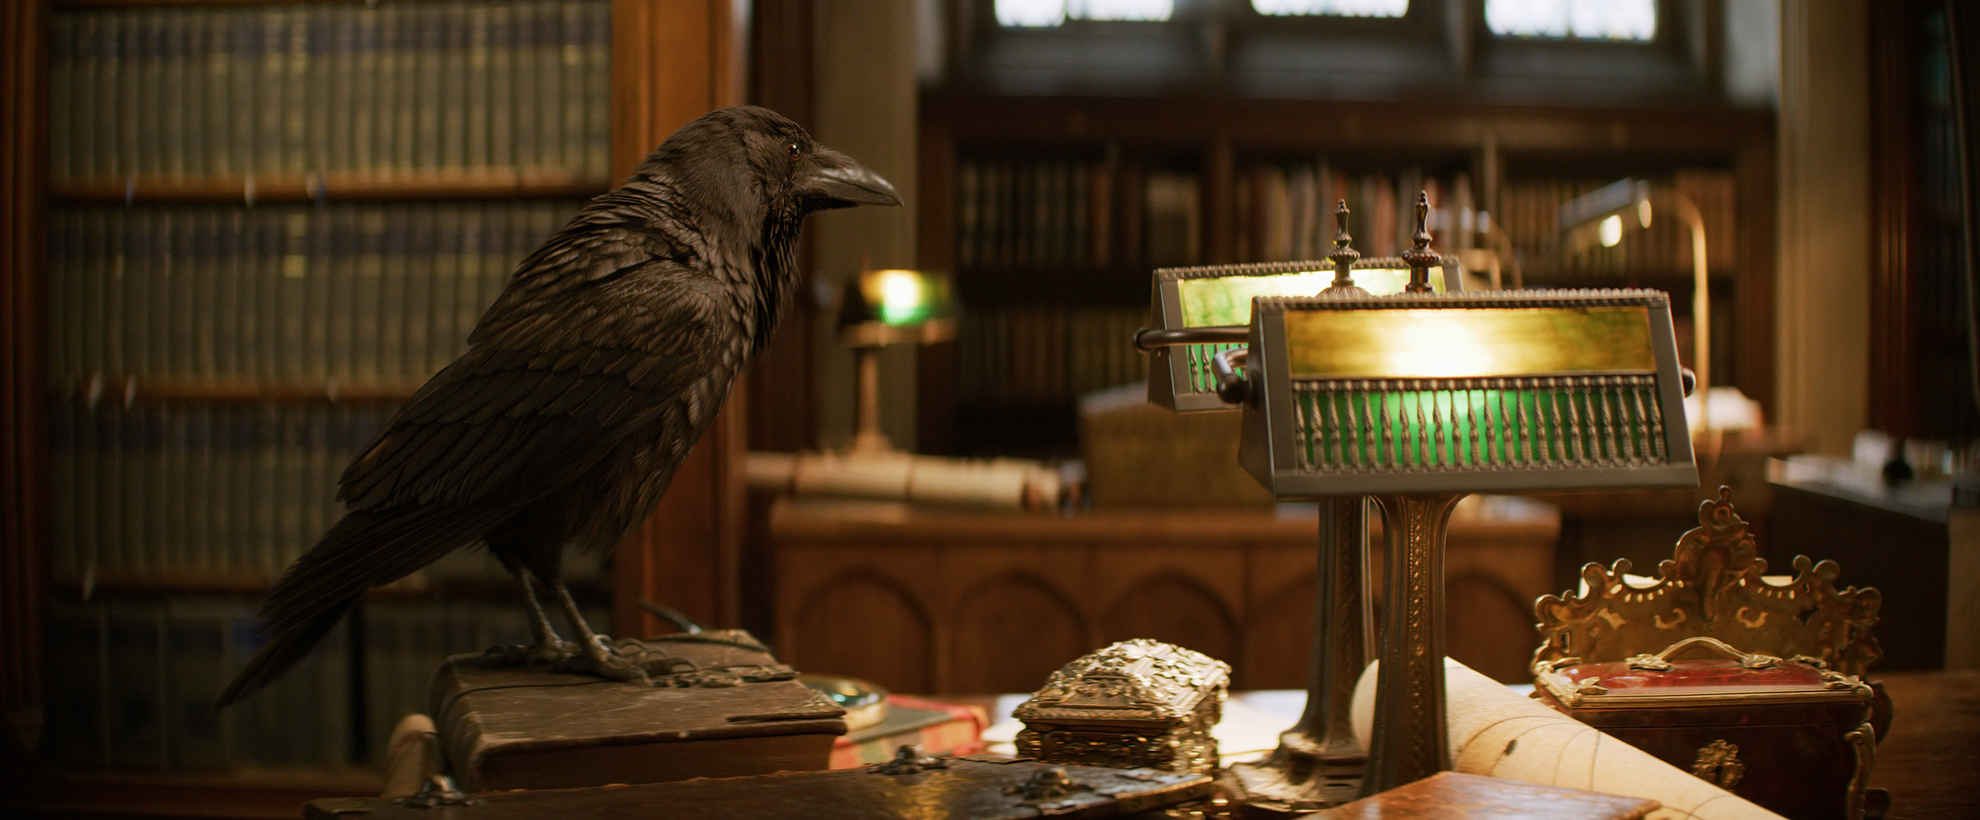 A raven sitting on a desk in an ornate library